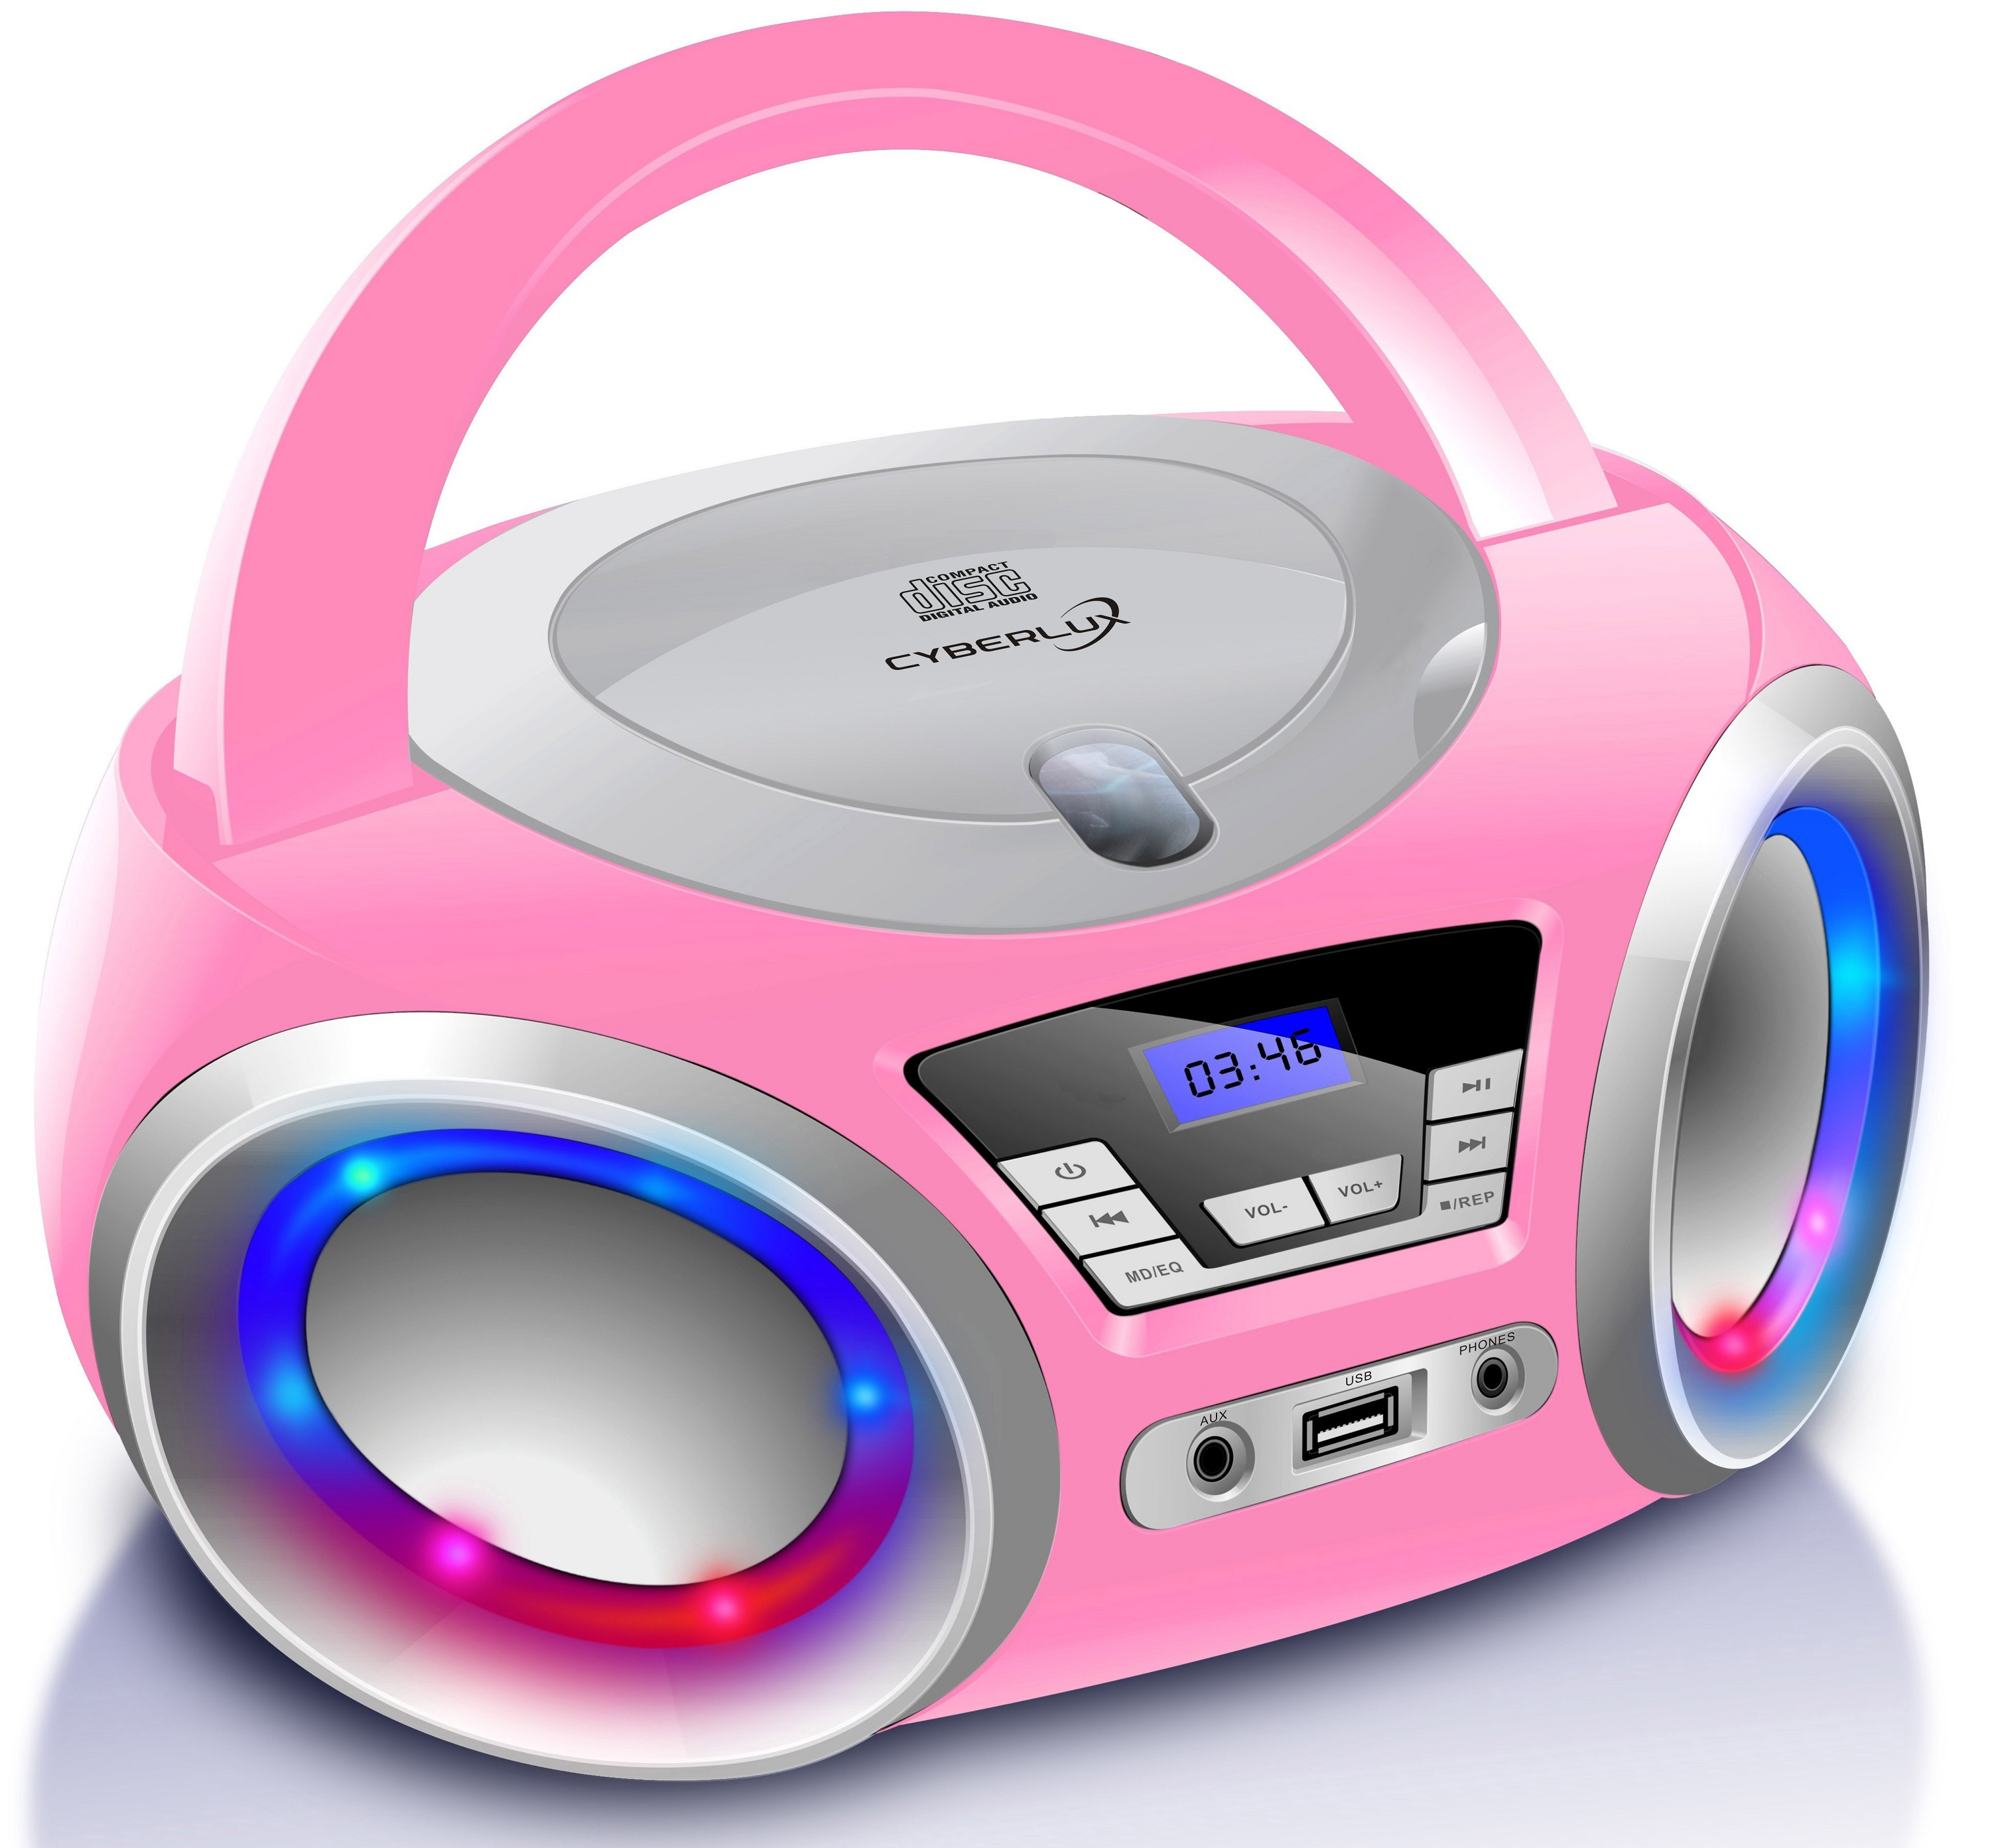 mit Kopfhöreranschluss CYBERLUX CD-Player Stereo LED-Beleuchtung Pink Radio Tragbares Loopy CL-910 | |